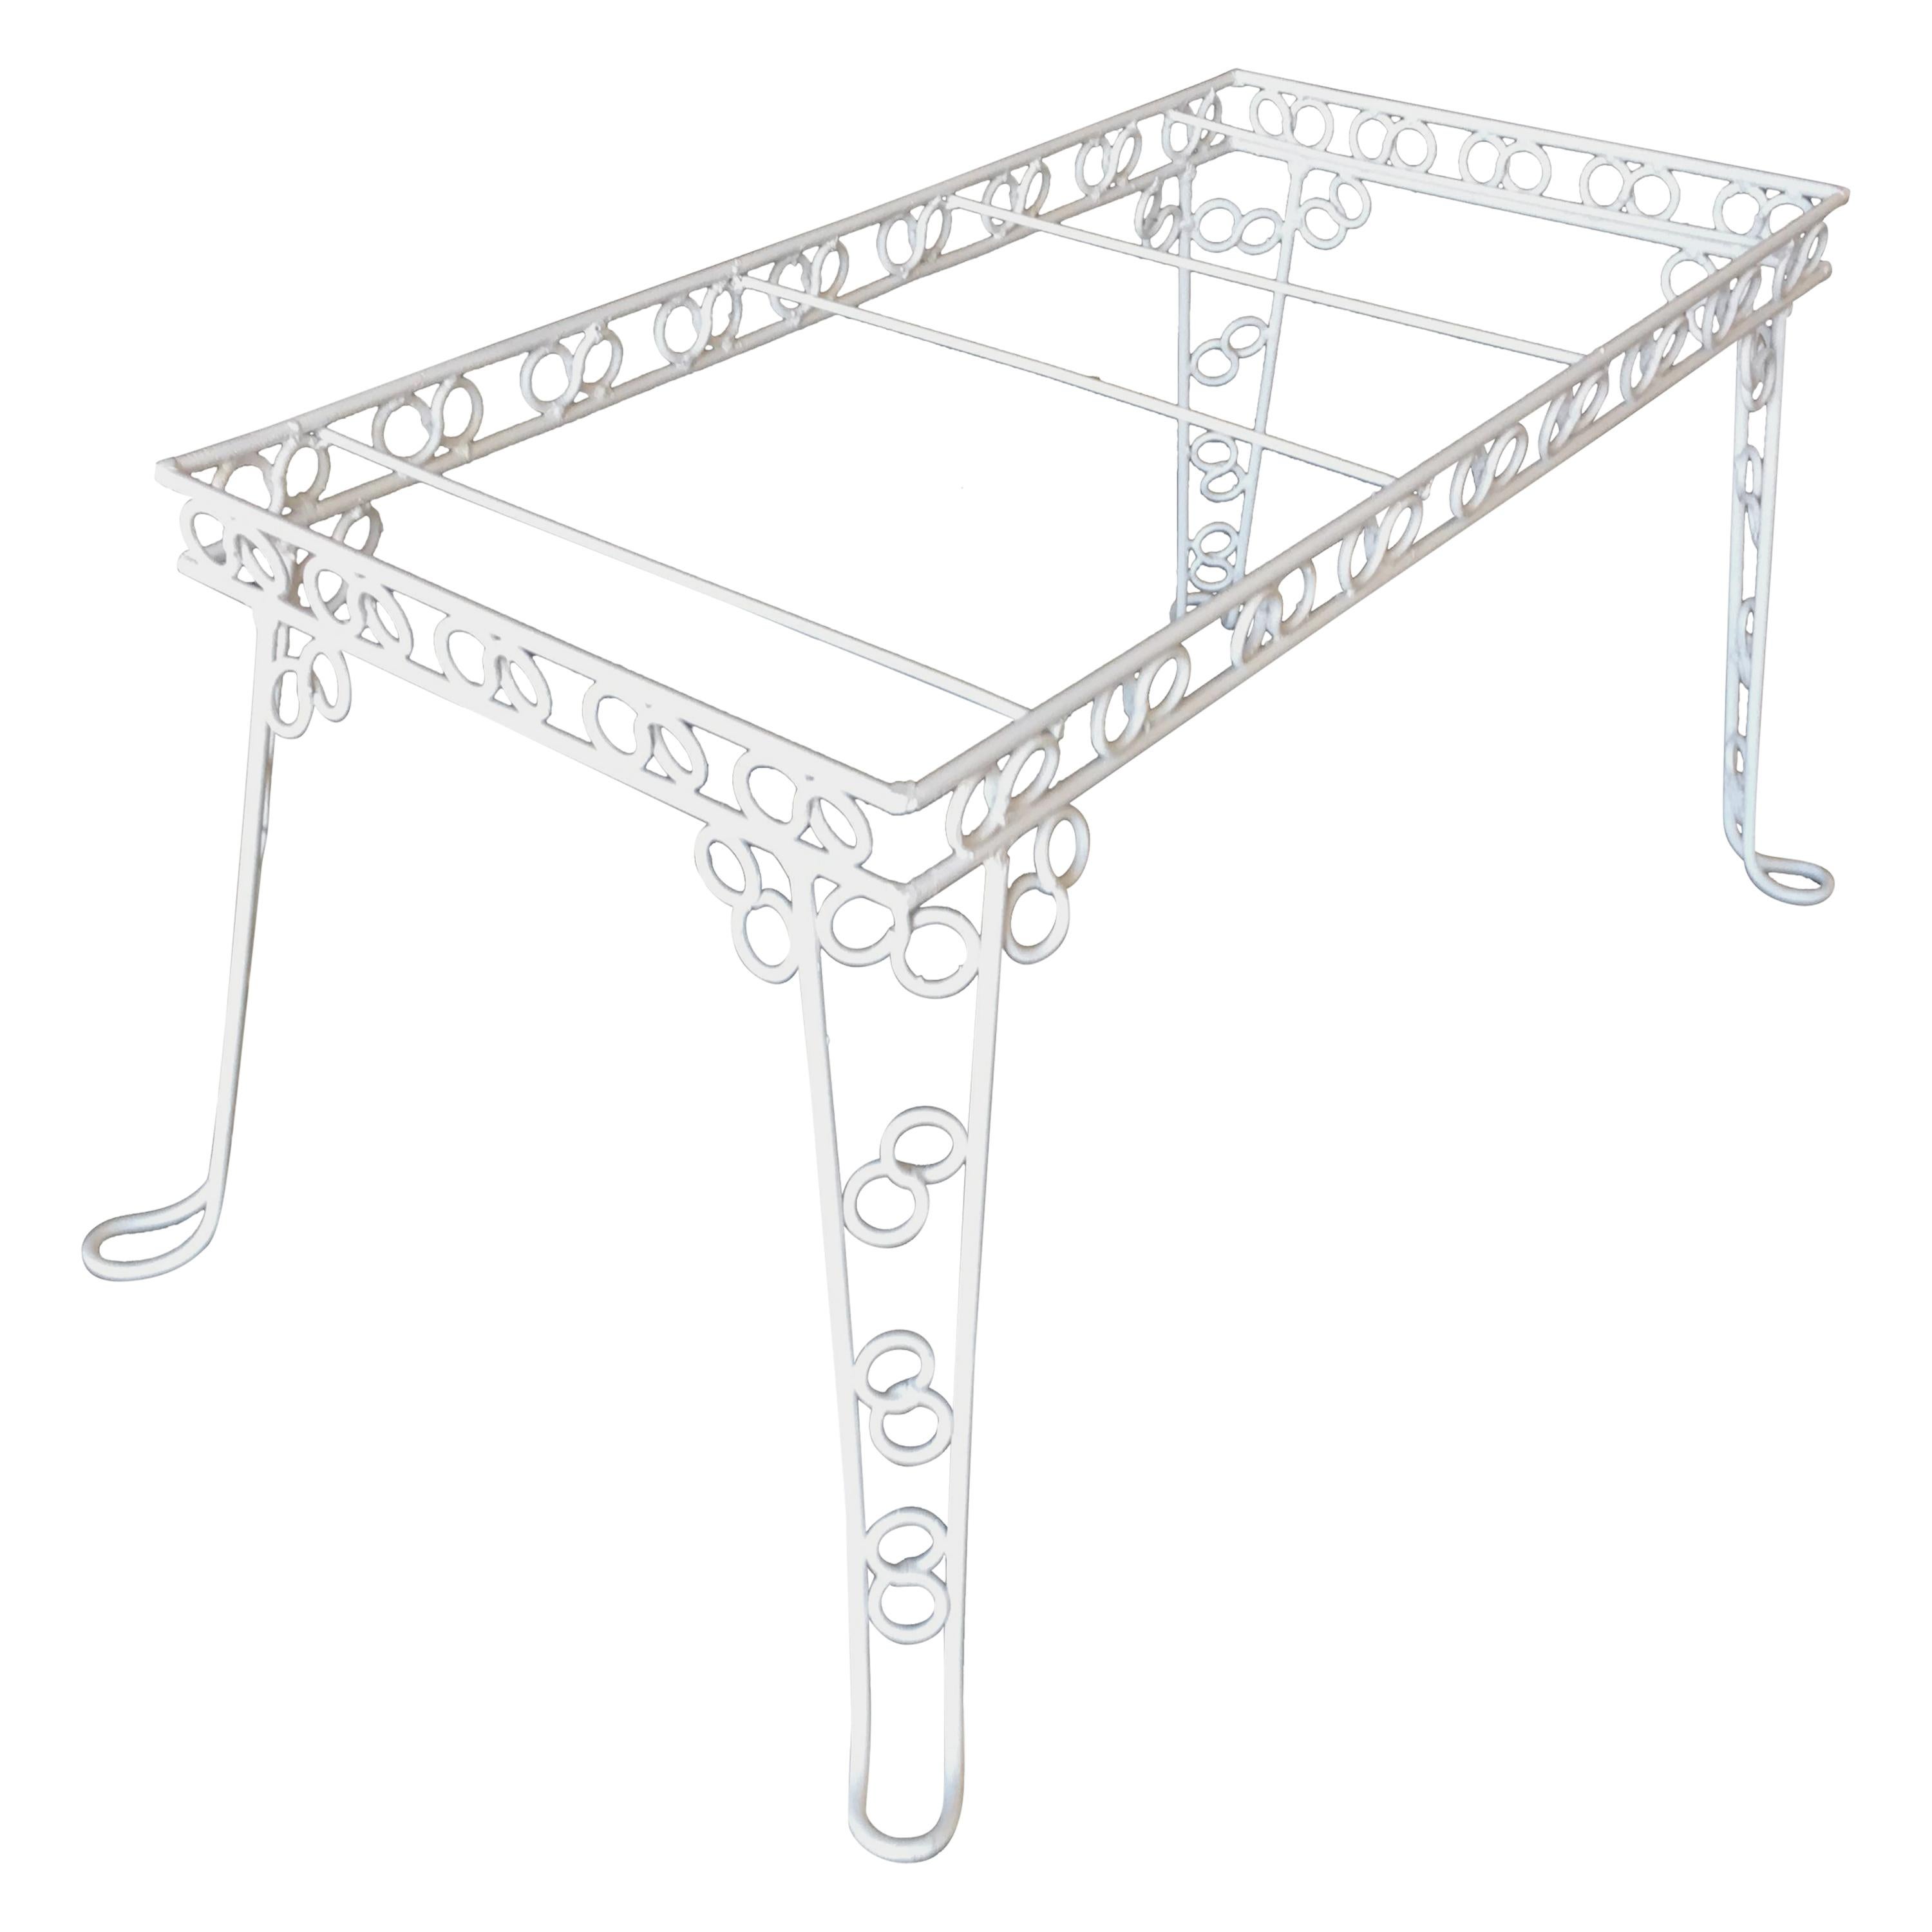 Custom 4 Person Outdoor "Circle 8" Iron Table with Glass Top For Sale